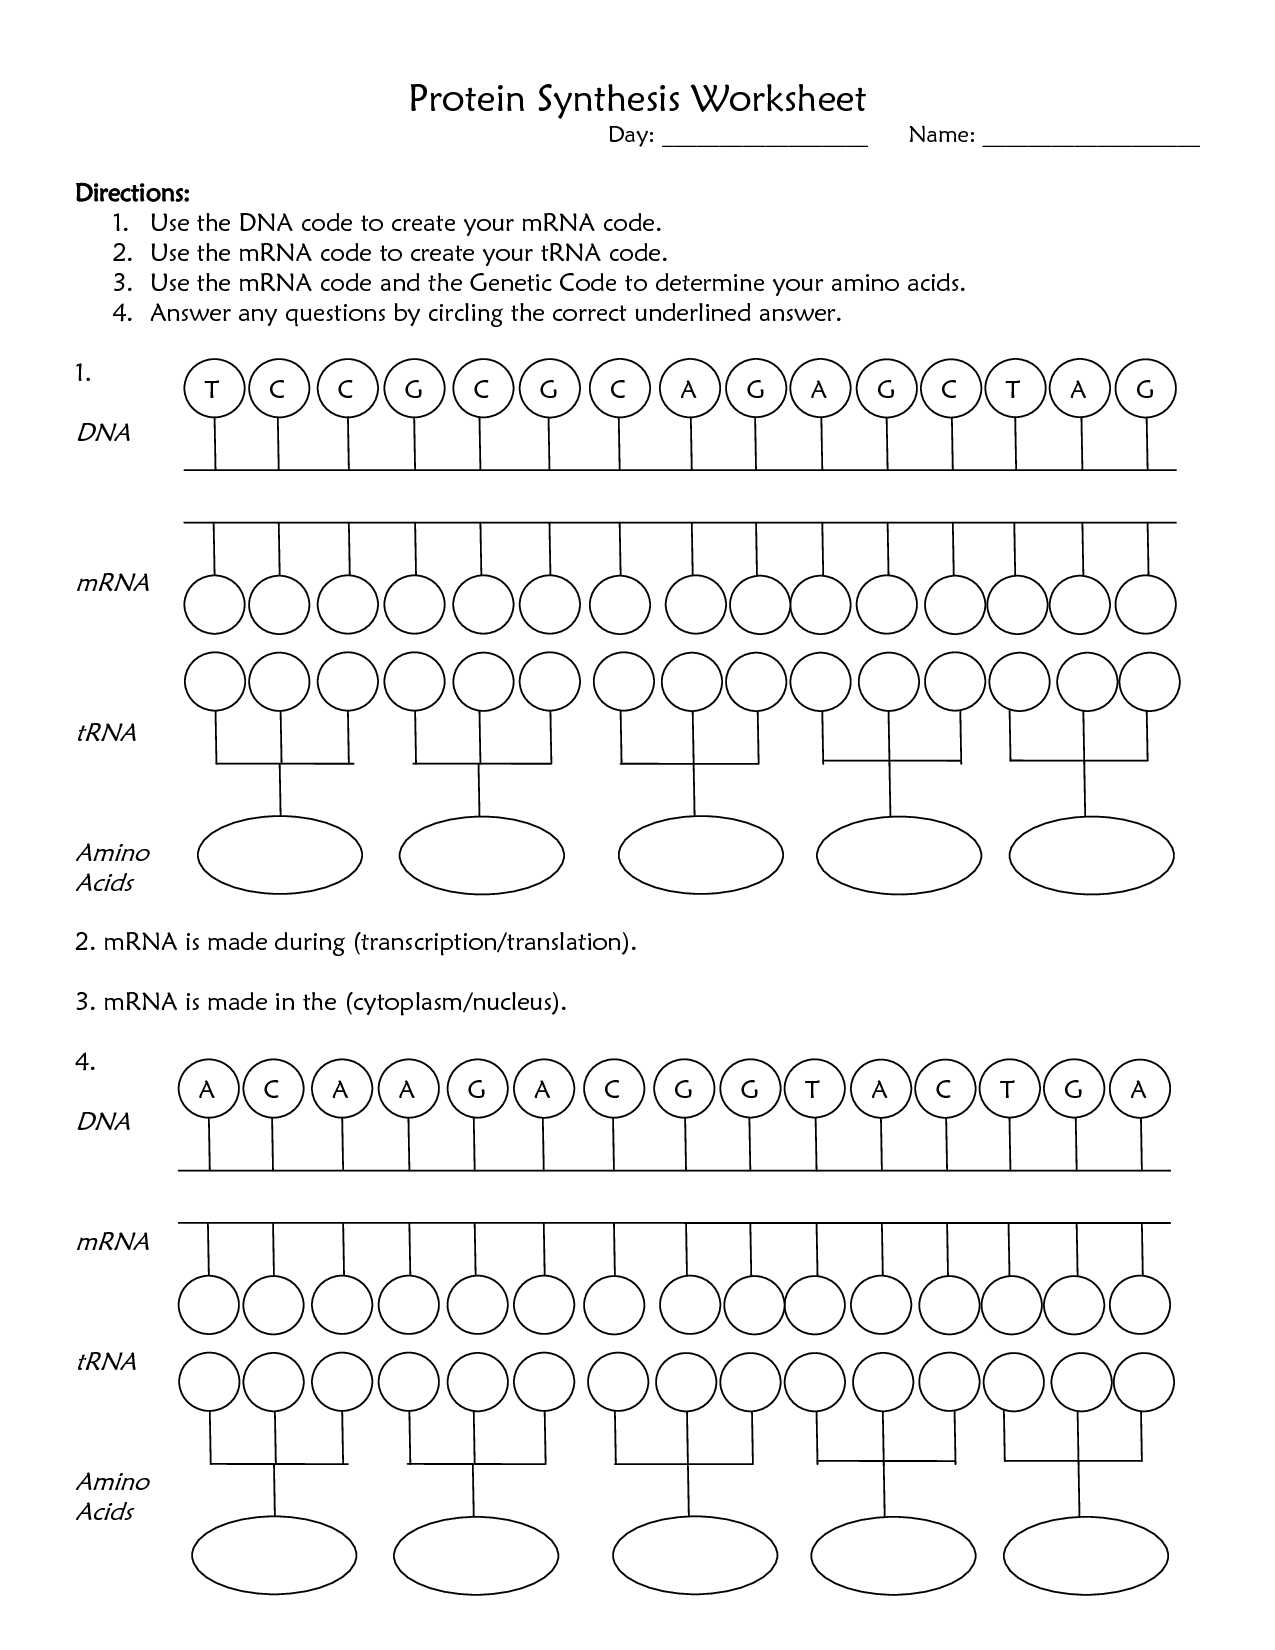 Dna Protein Synthesis Worksheet - ProteinWalls Inside Protein Synthesis Worksheet Answer Key